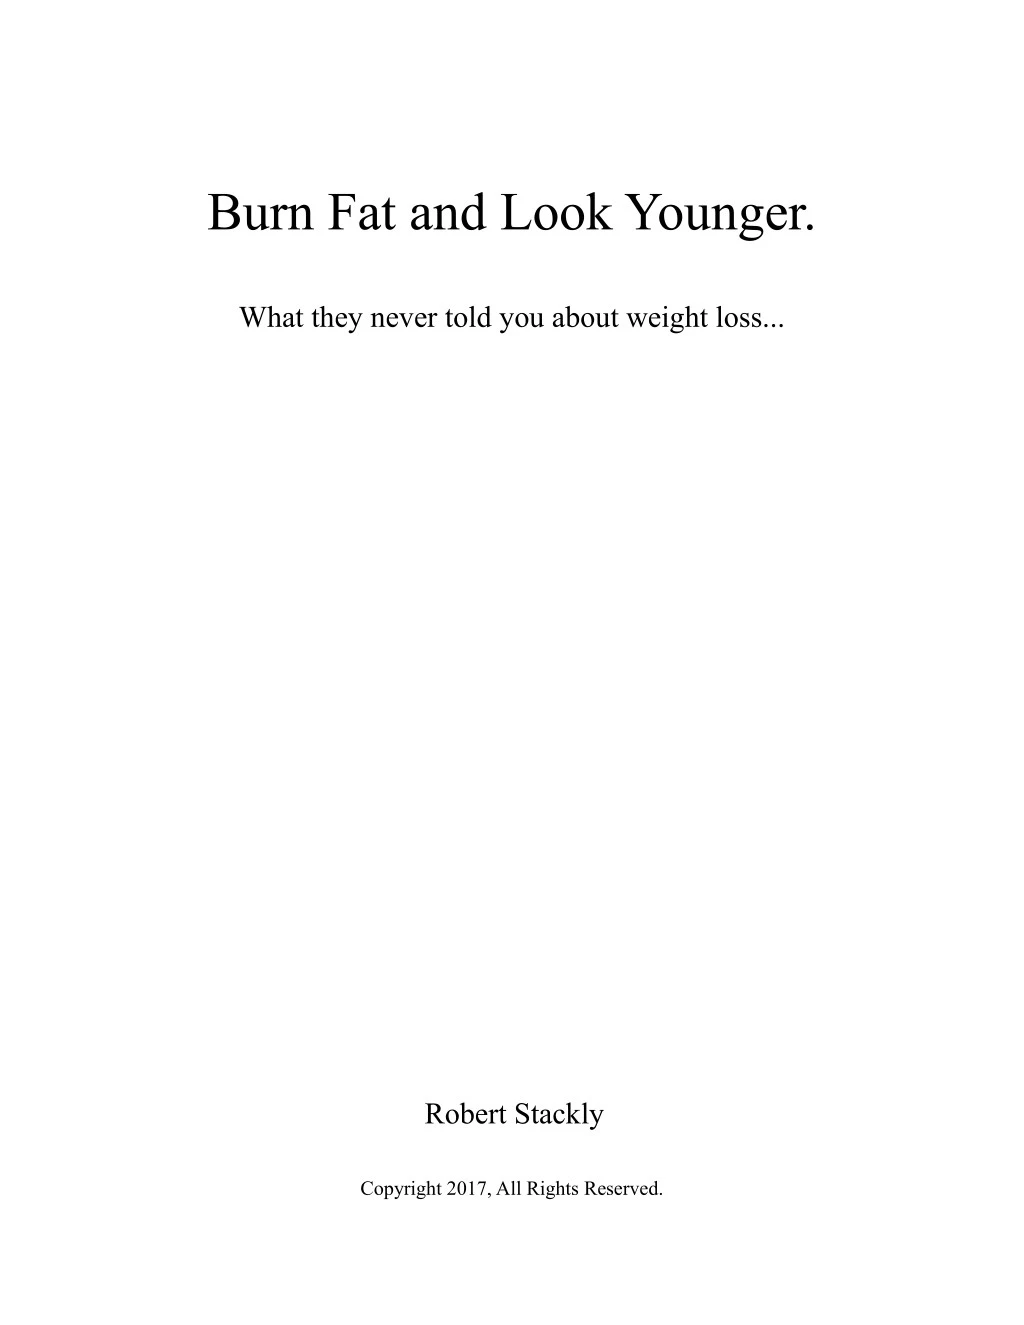 burn fat and look younger